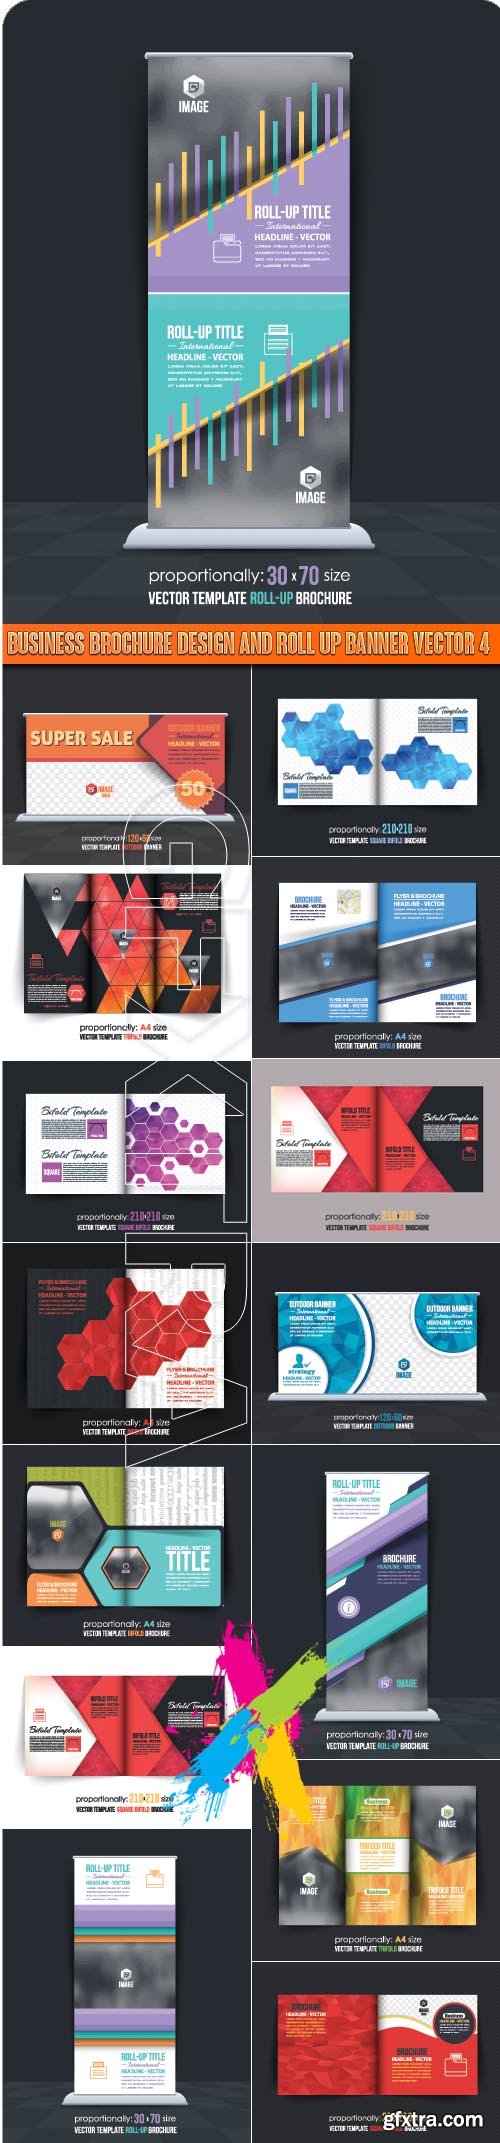 Business Brochure Design and Roll up banner vector 4